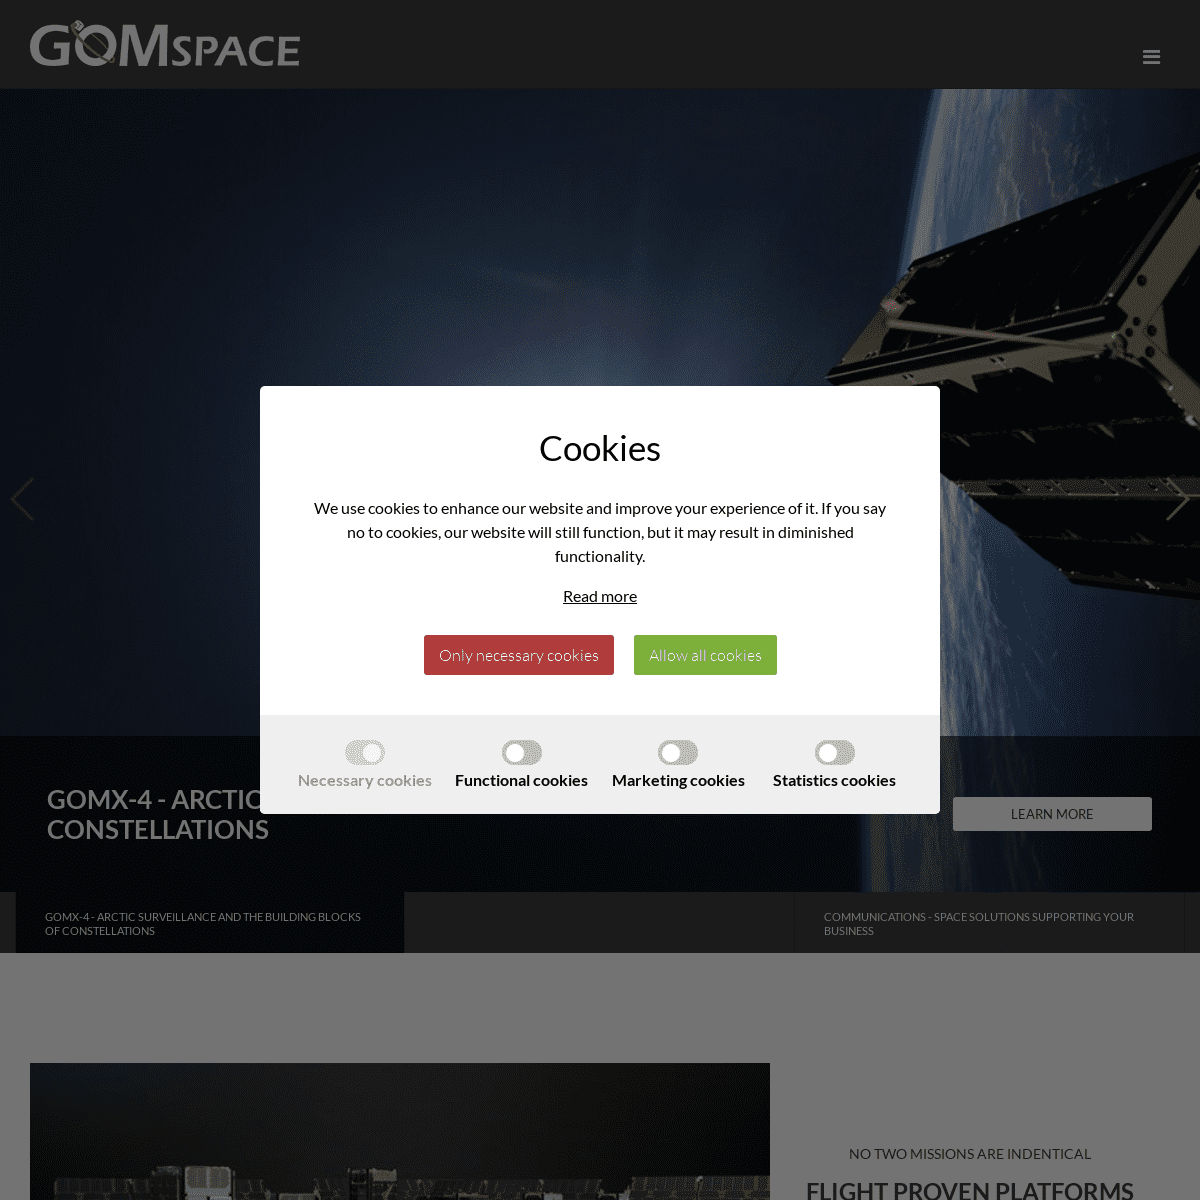 A complete backup of https://gomspace.com